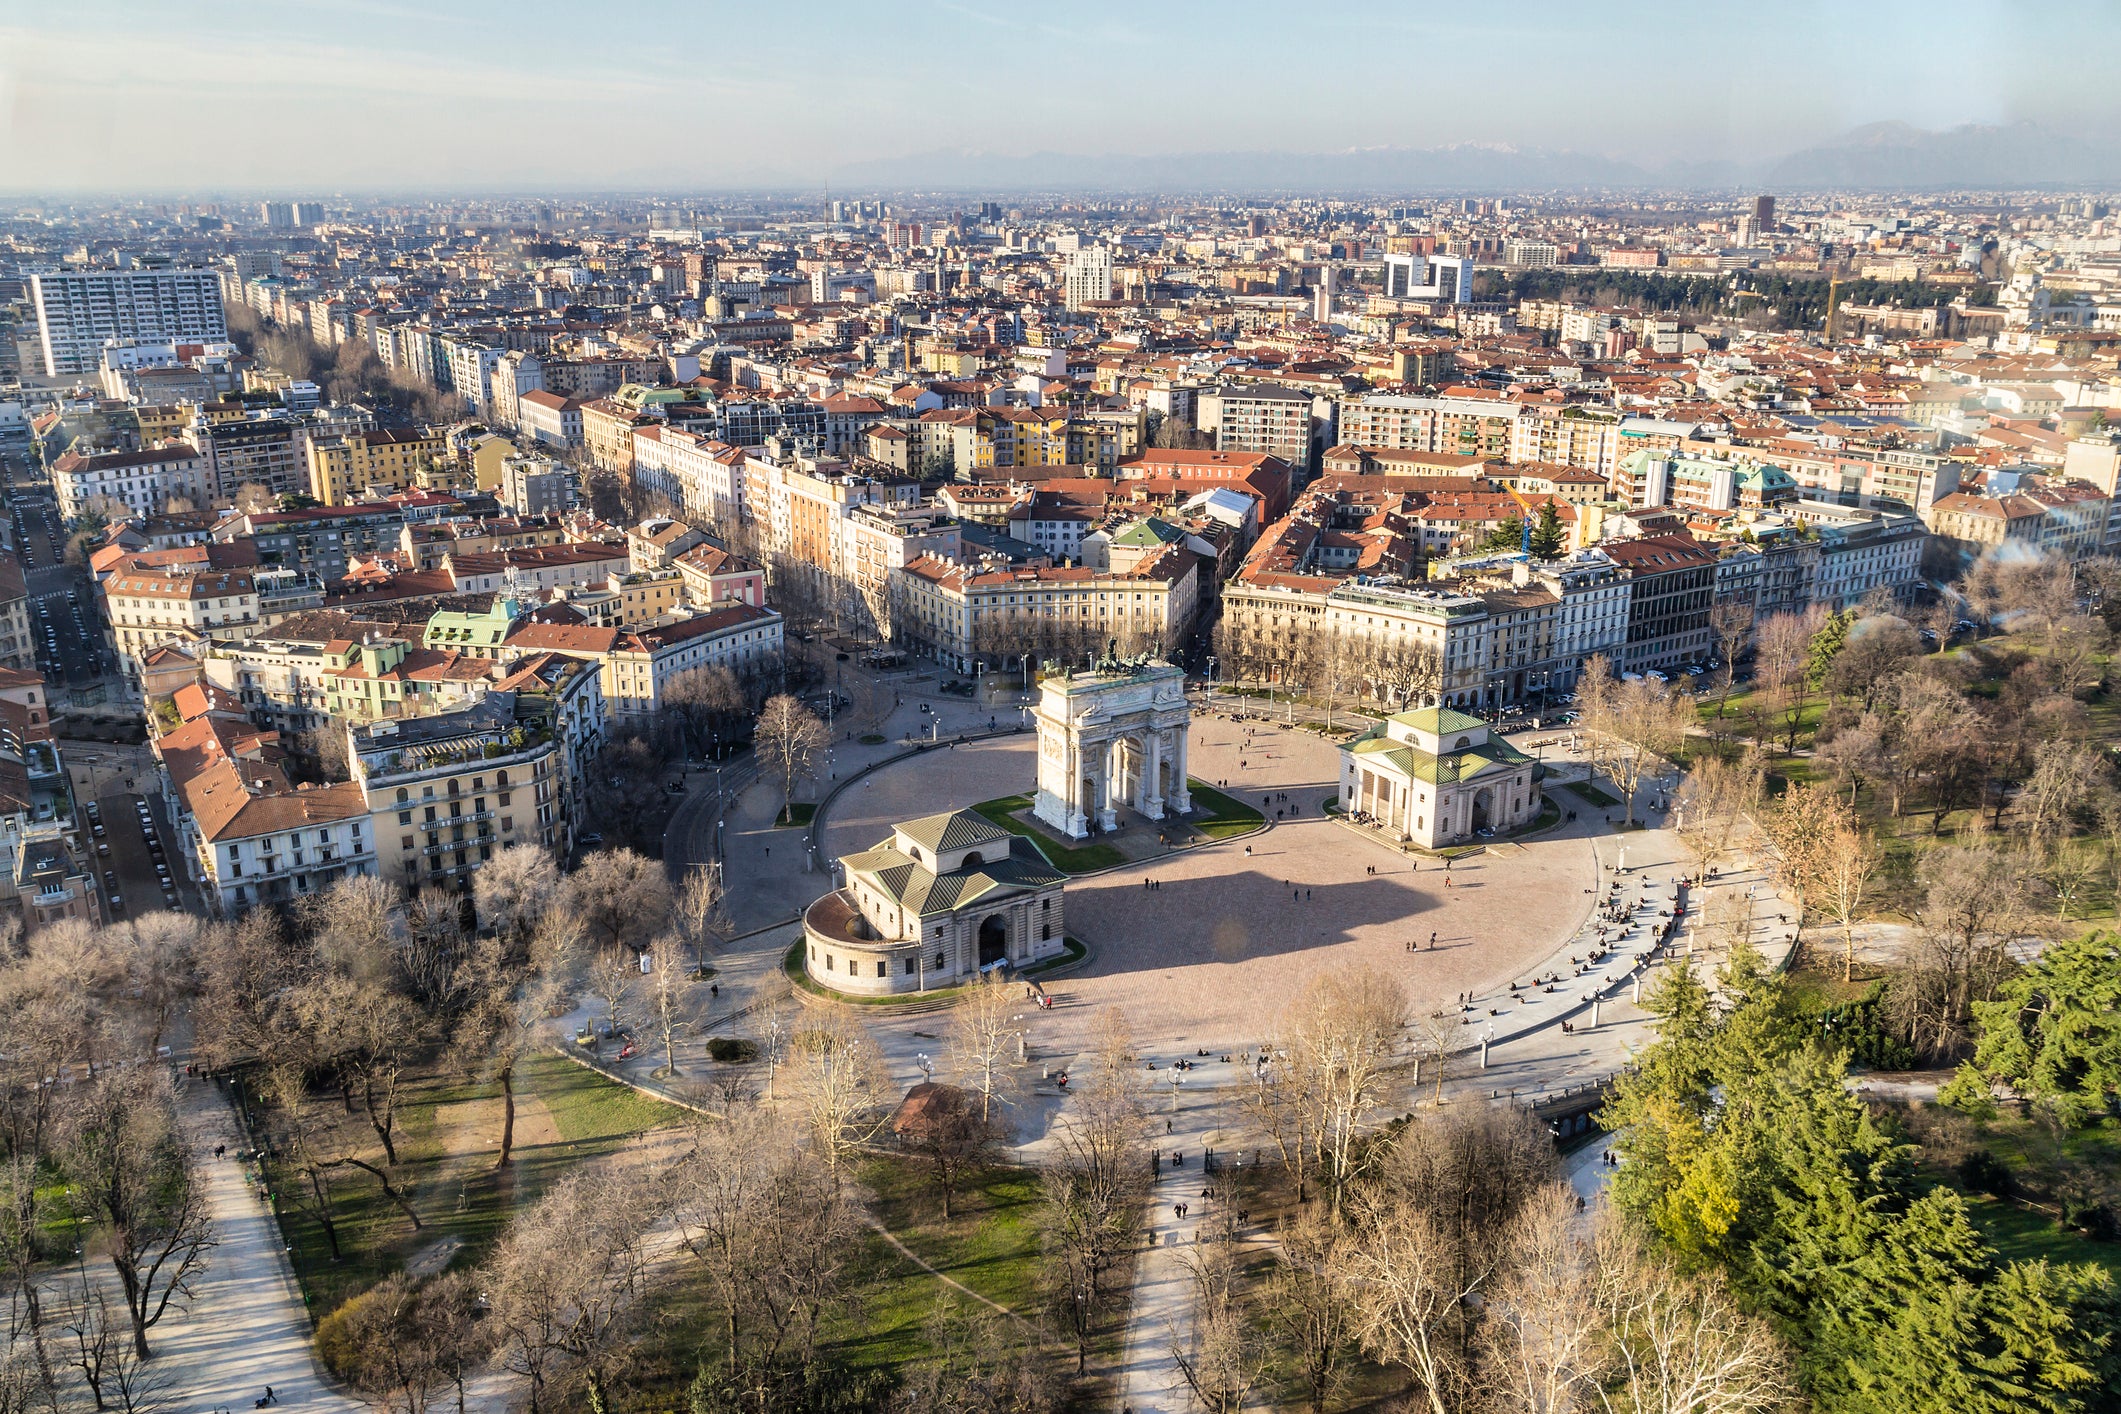 Overview of the city of Milan in Italy